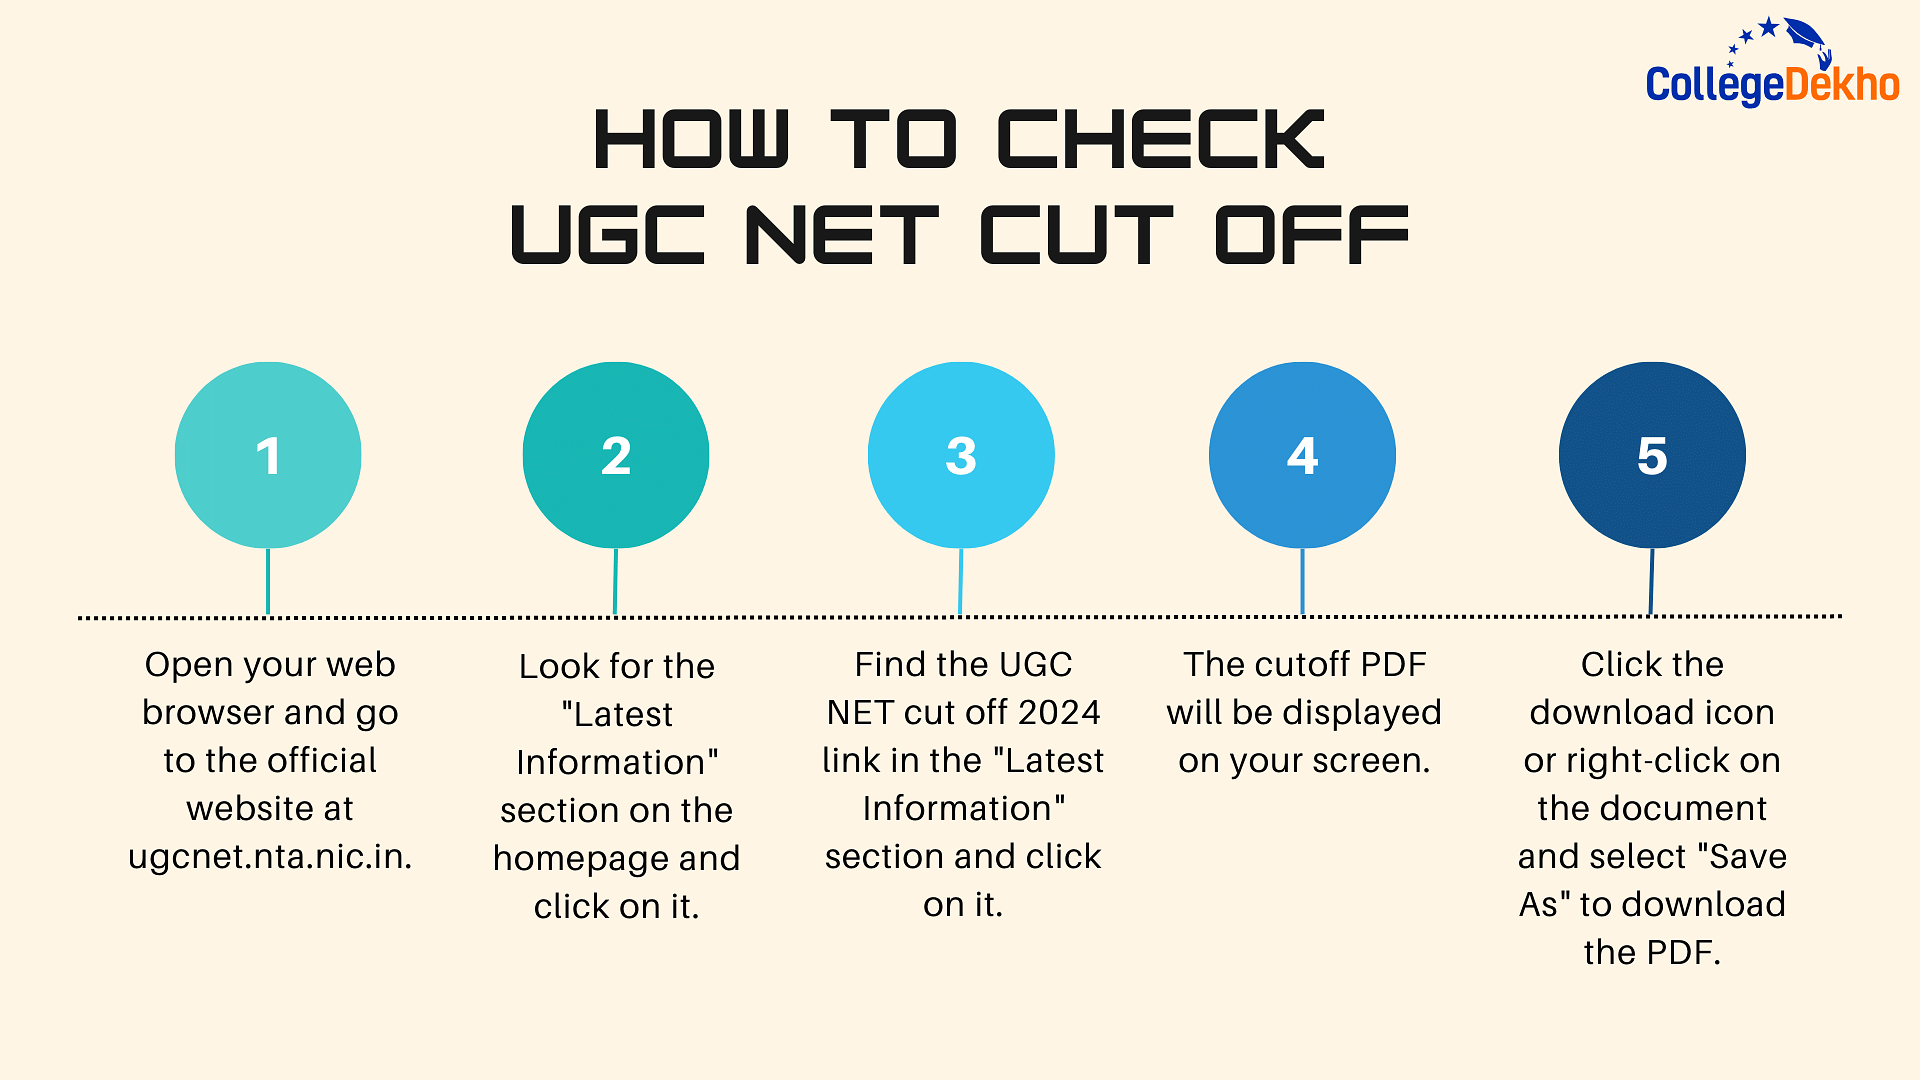 How to Check UGC NET Cut Off